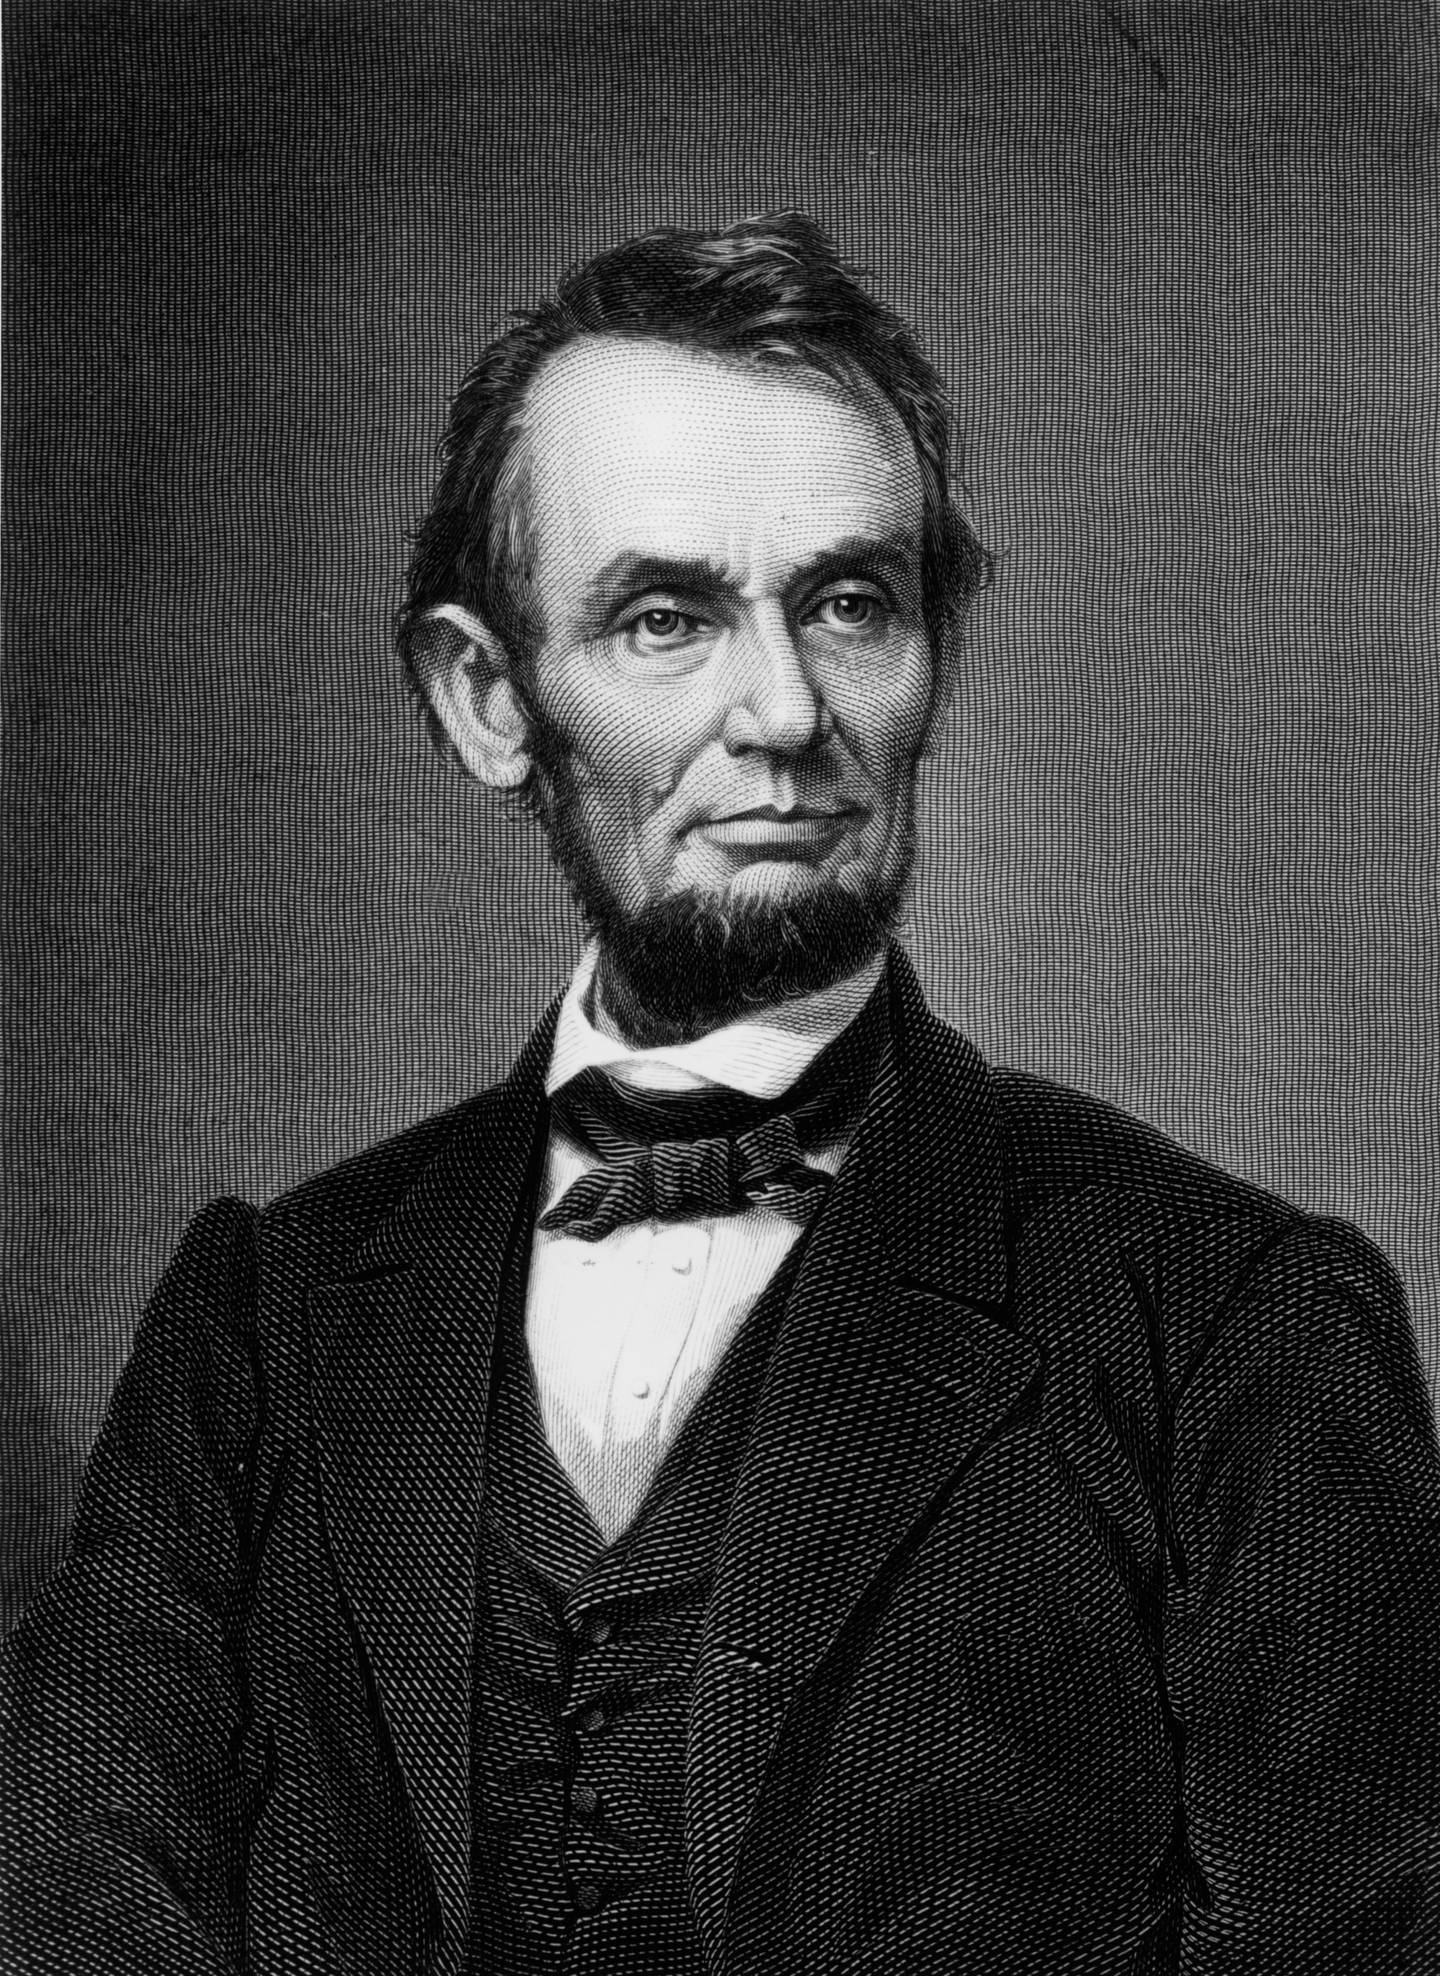 circa 1850:  Abraham Lincoln (1809 - 1865), the sixteenth president of the United States who abolished slavery and steered the Union to victory in the American Civil War.  (Photo by Hulton Archive/Getty Images)